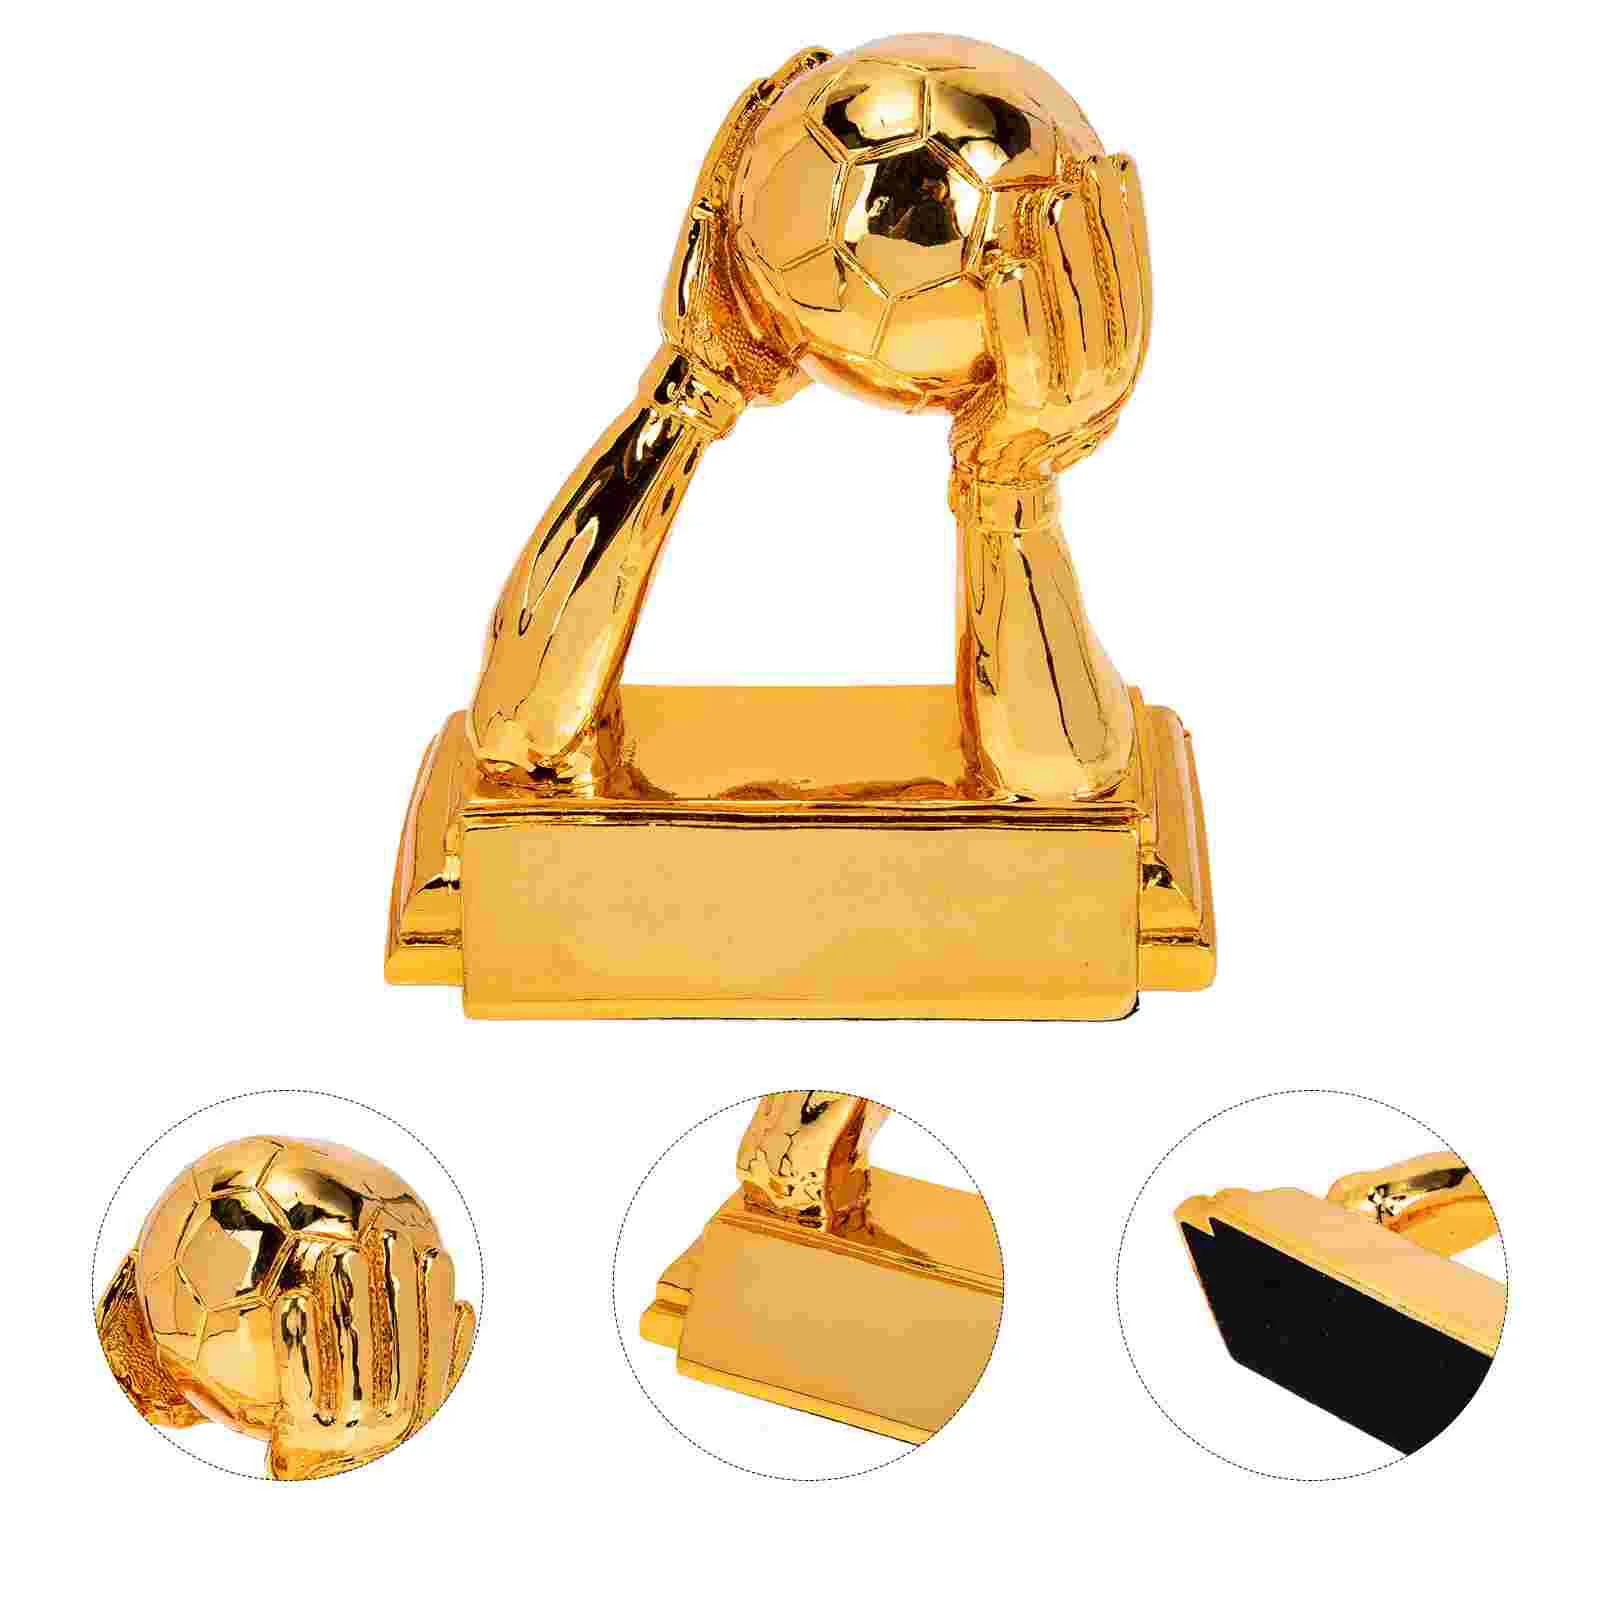 

Football Trophy Home Decor Resin Soccer Decorations Competition Supply Accessory Exquisite Adornment Decorative Child Trophies